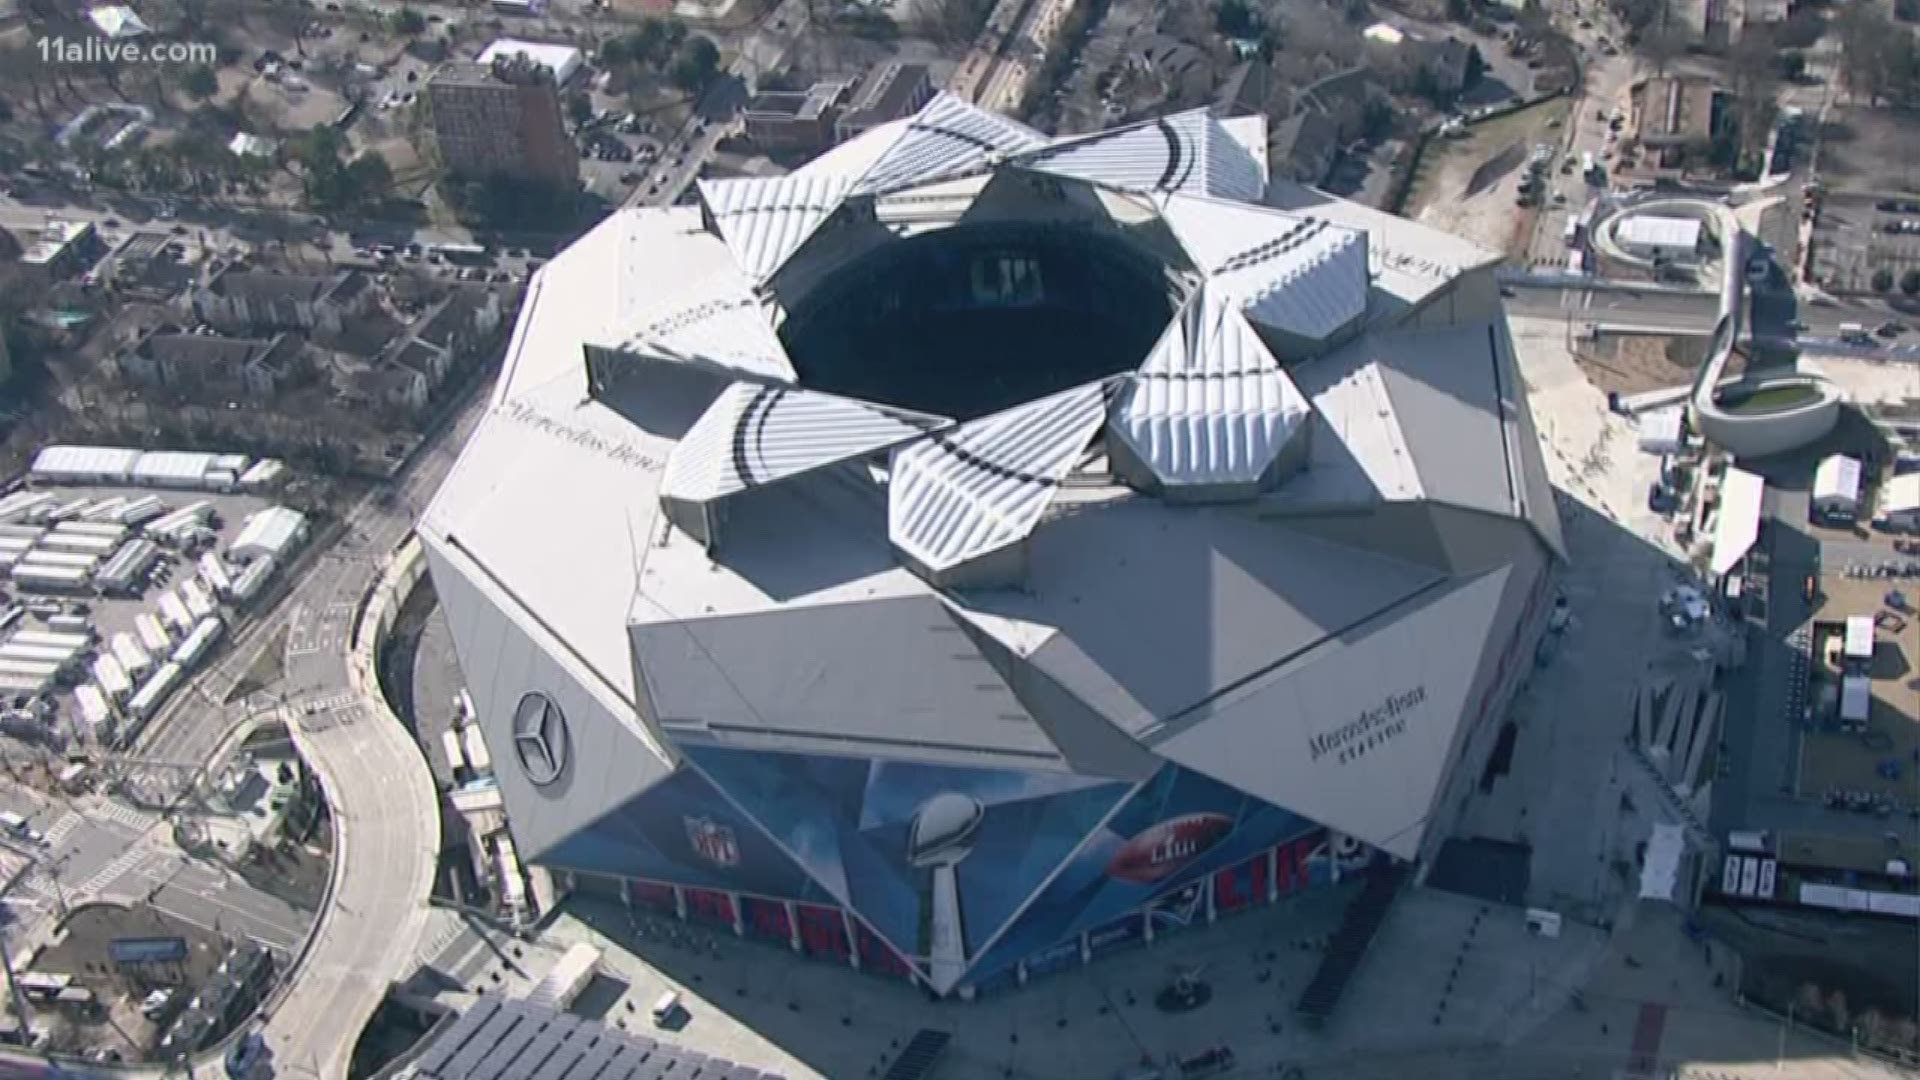 Get a bird's eye view of the campus for Super Bowl 53 in Atlanta two days before the game.